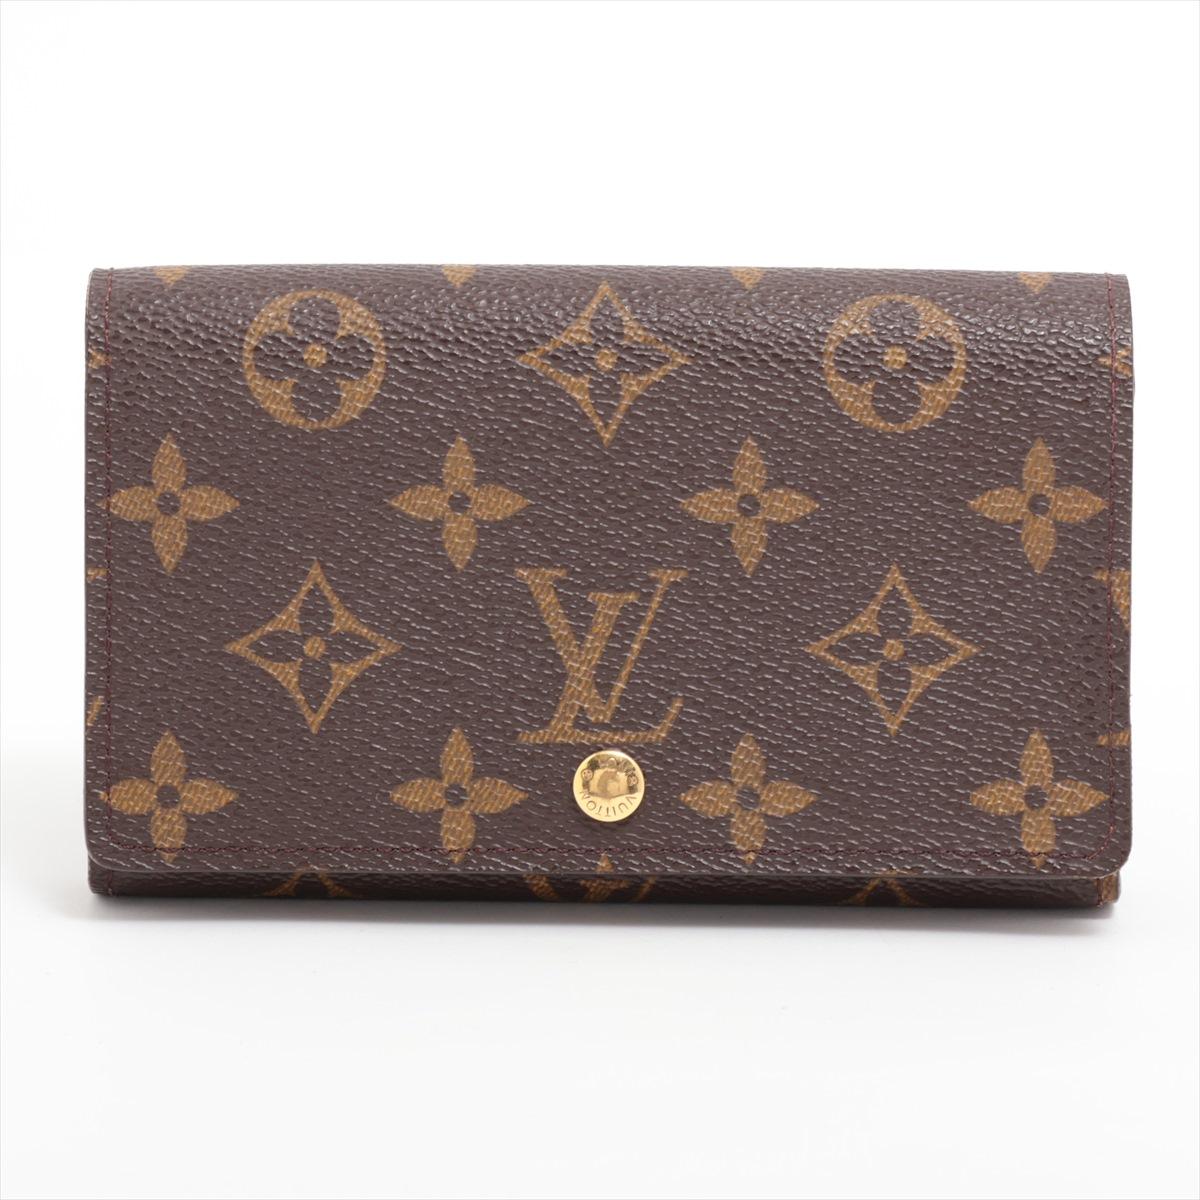 The Louis Vuitton Monogram Porte Monnaie Billets Tresor Wallet is a refined and functional accessory that combines classic elegance with modern practicality. Crafted from Louis Vuitton's iconic Monogram canvas, the wallet showcases the brand's